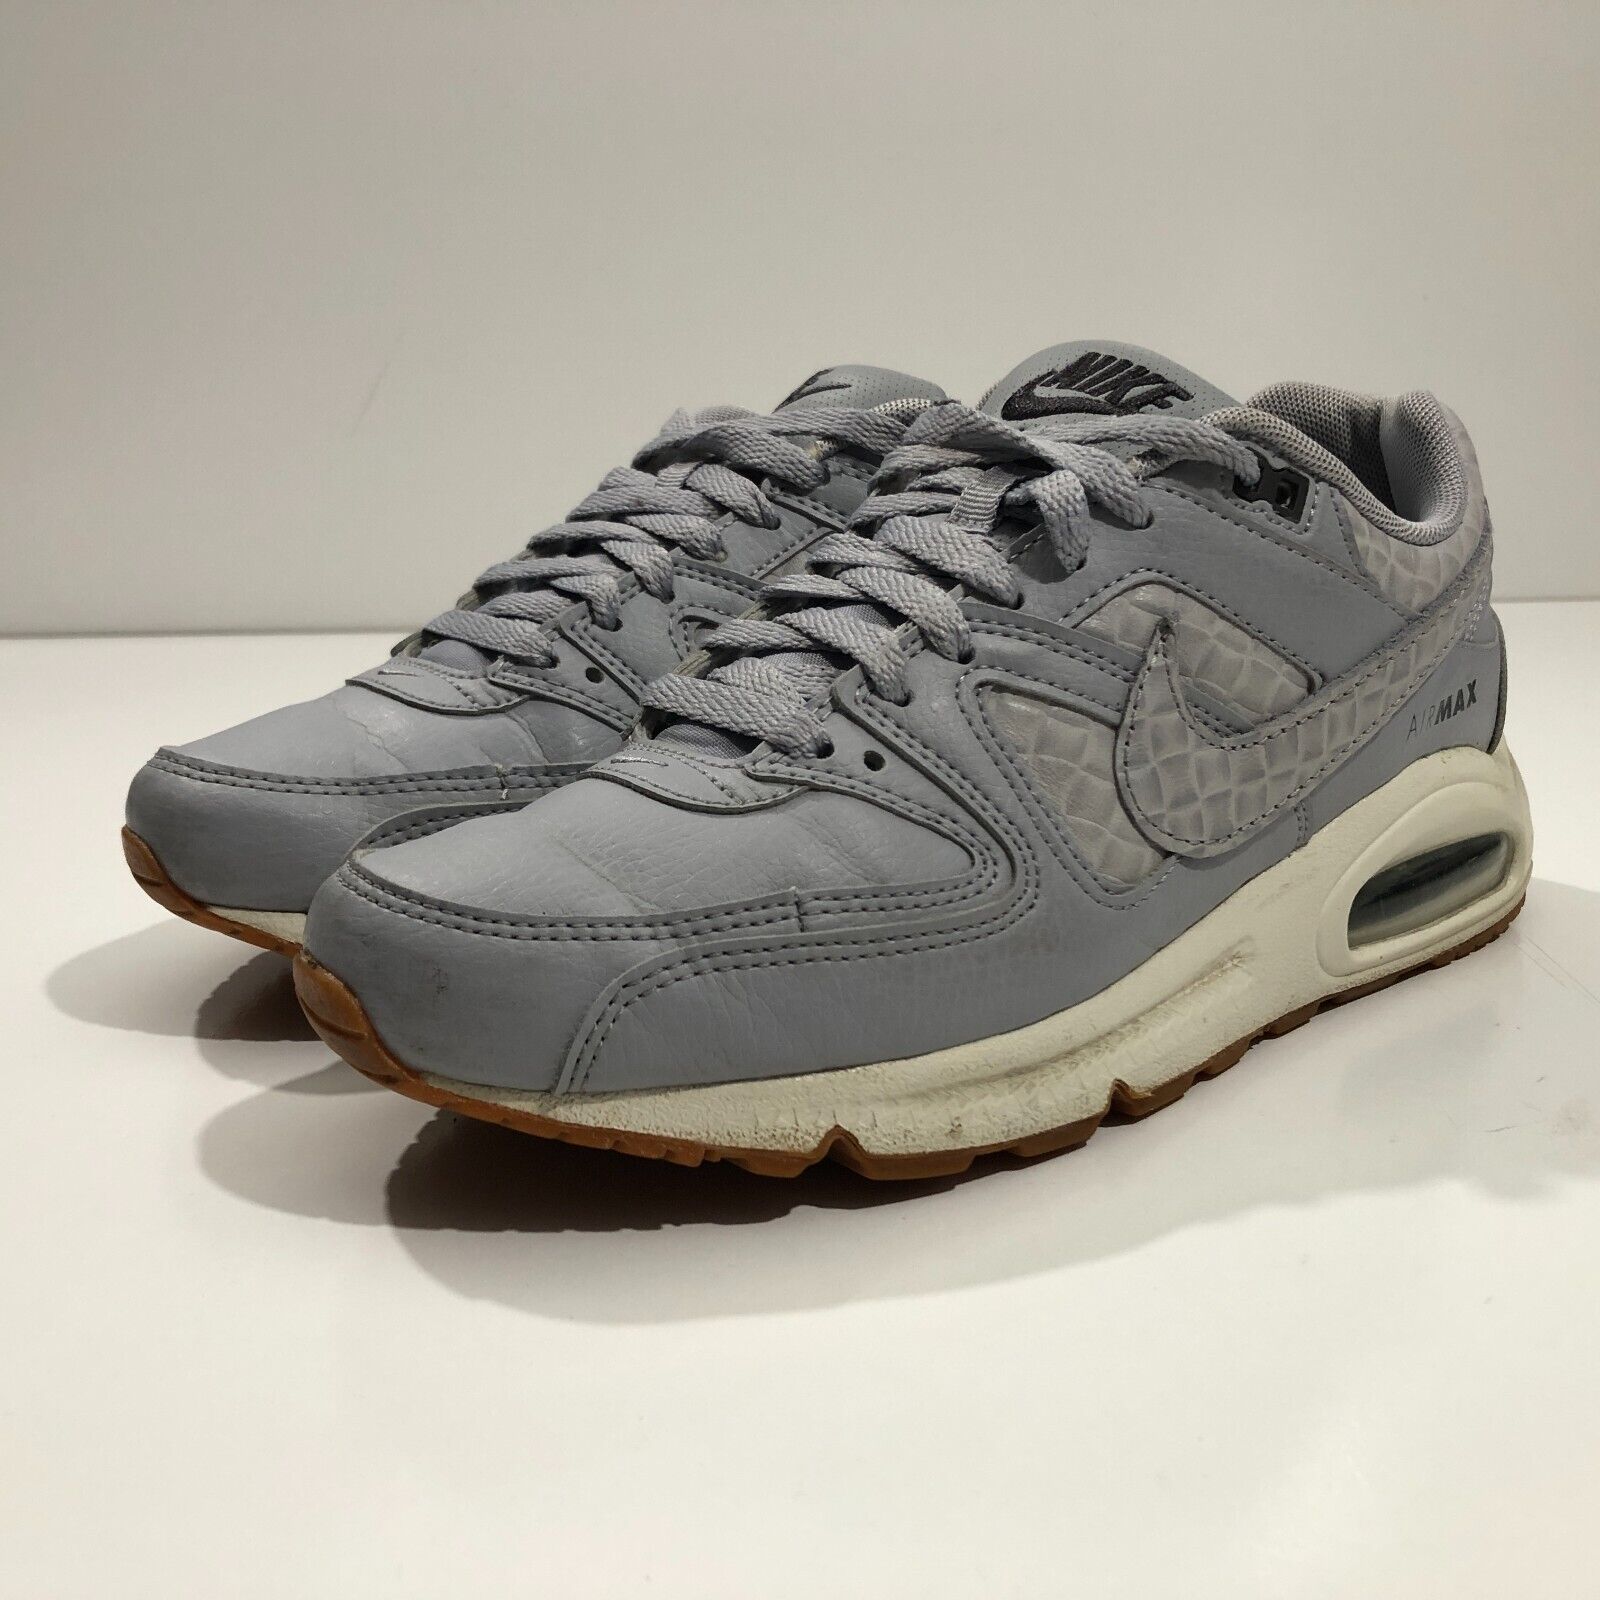 Size 8.5 - Nike Air Max Command Wolf Grey sale online | eBay